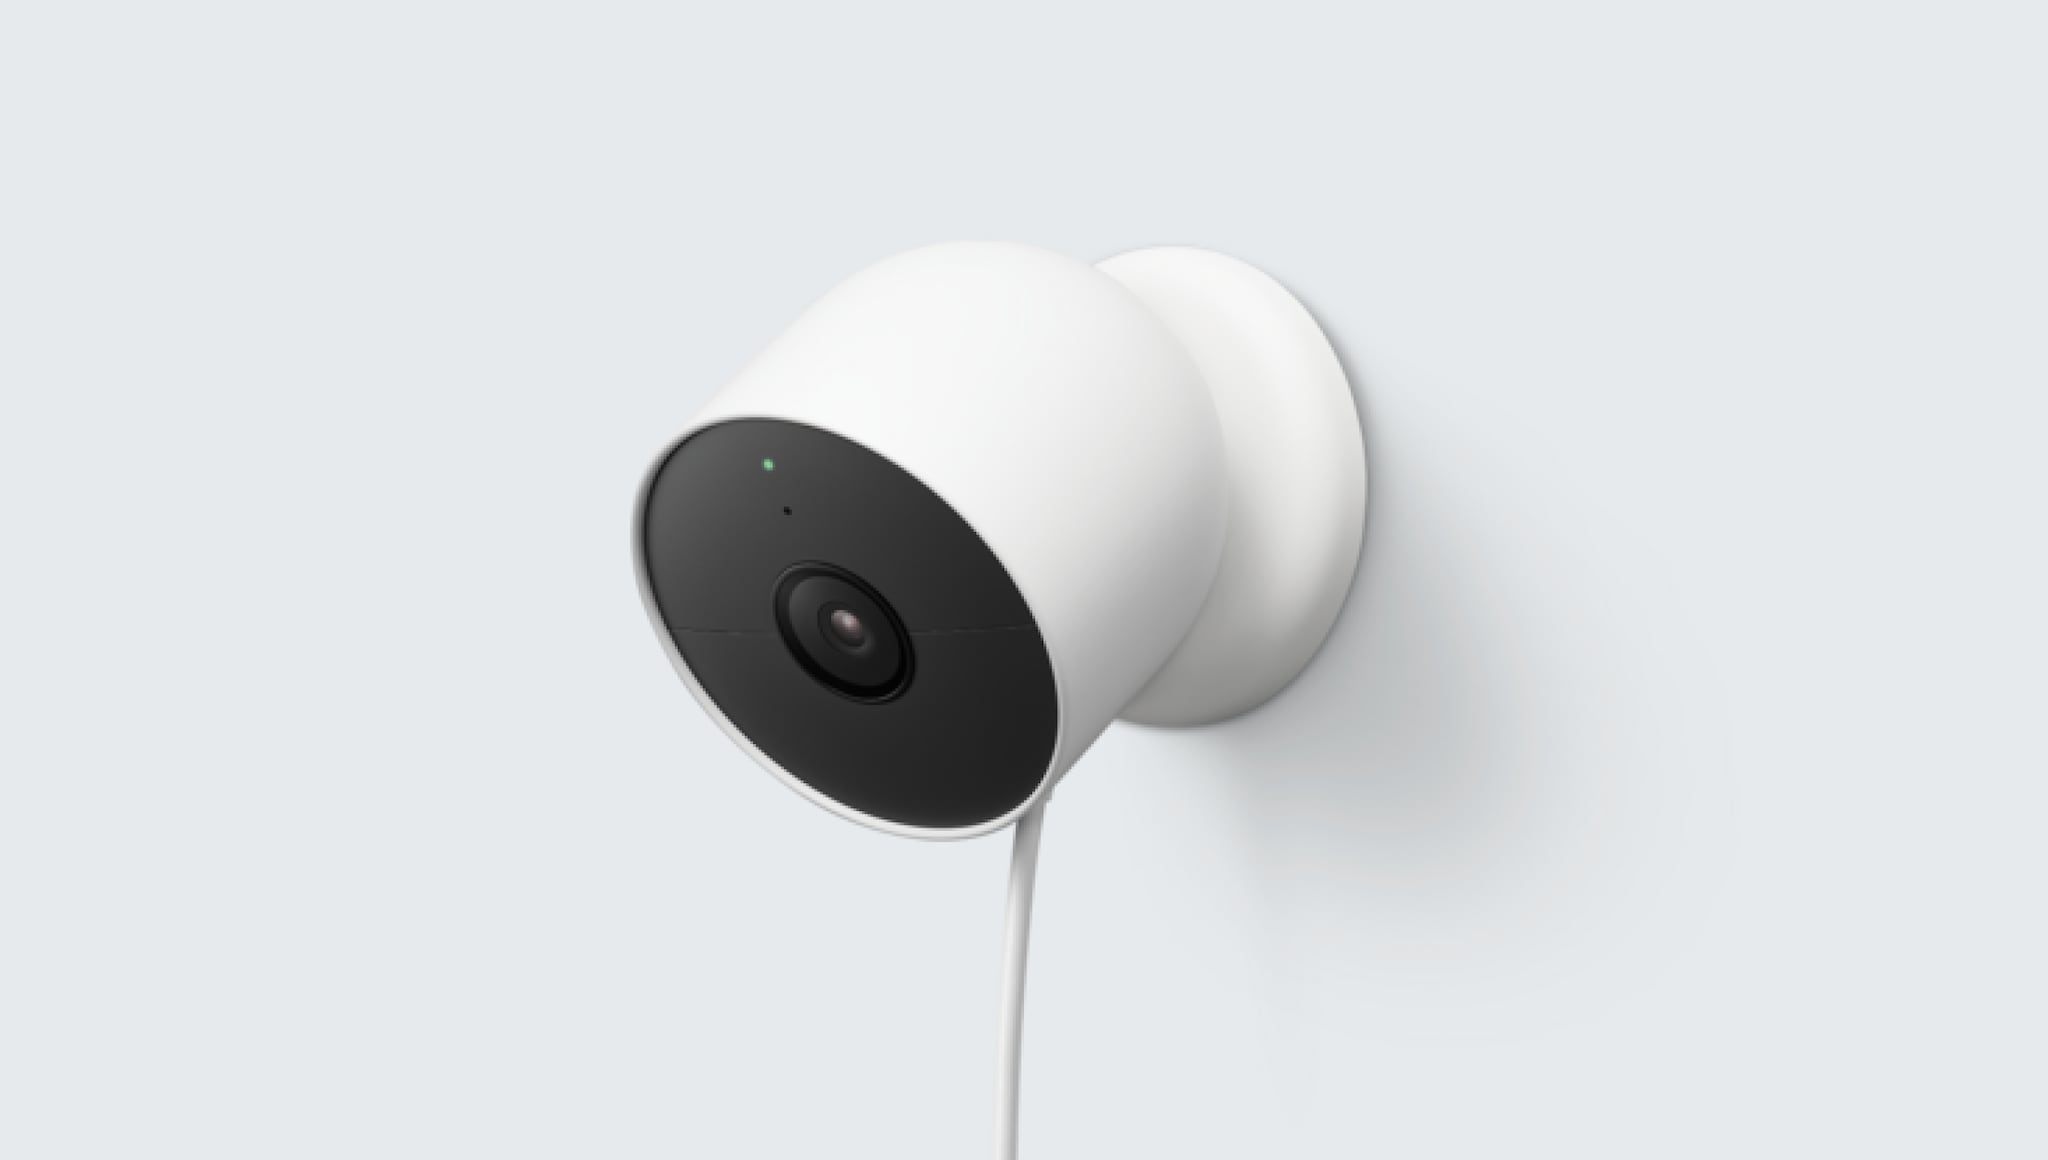 Outdoor Google Nest Cam mounted on a wall